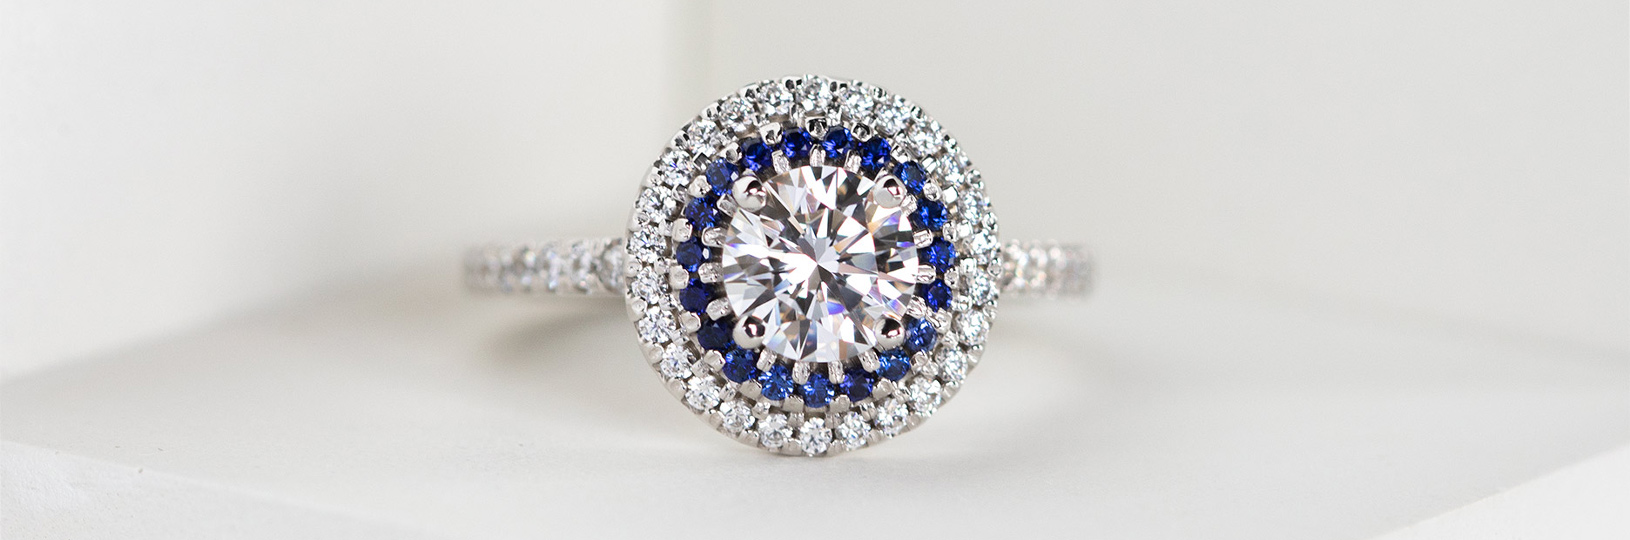 Halo sapphire engagement ring.